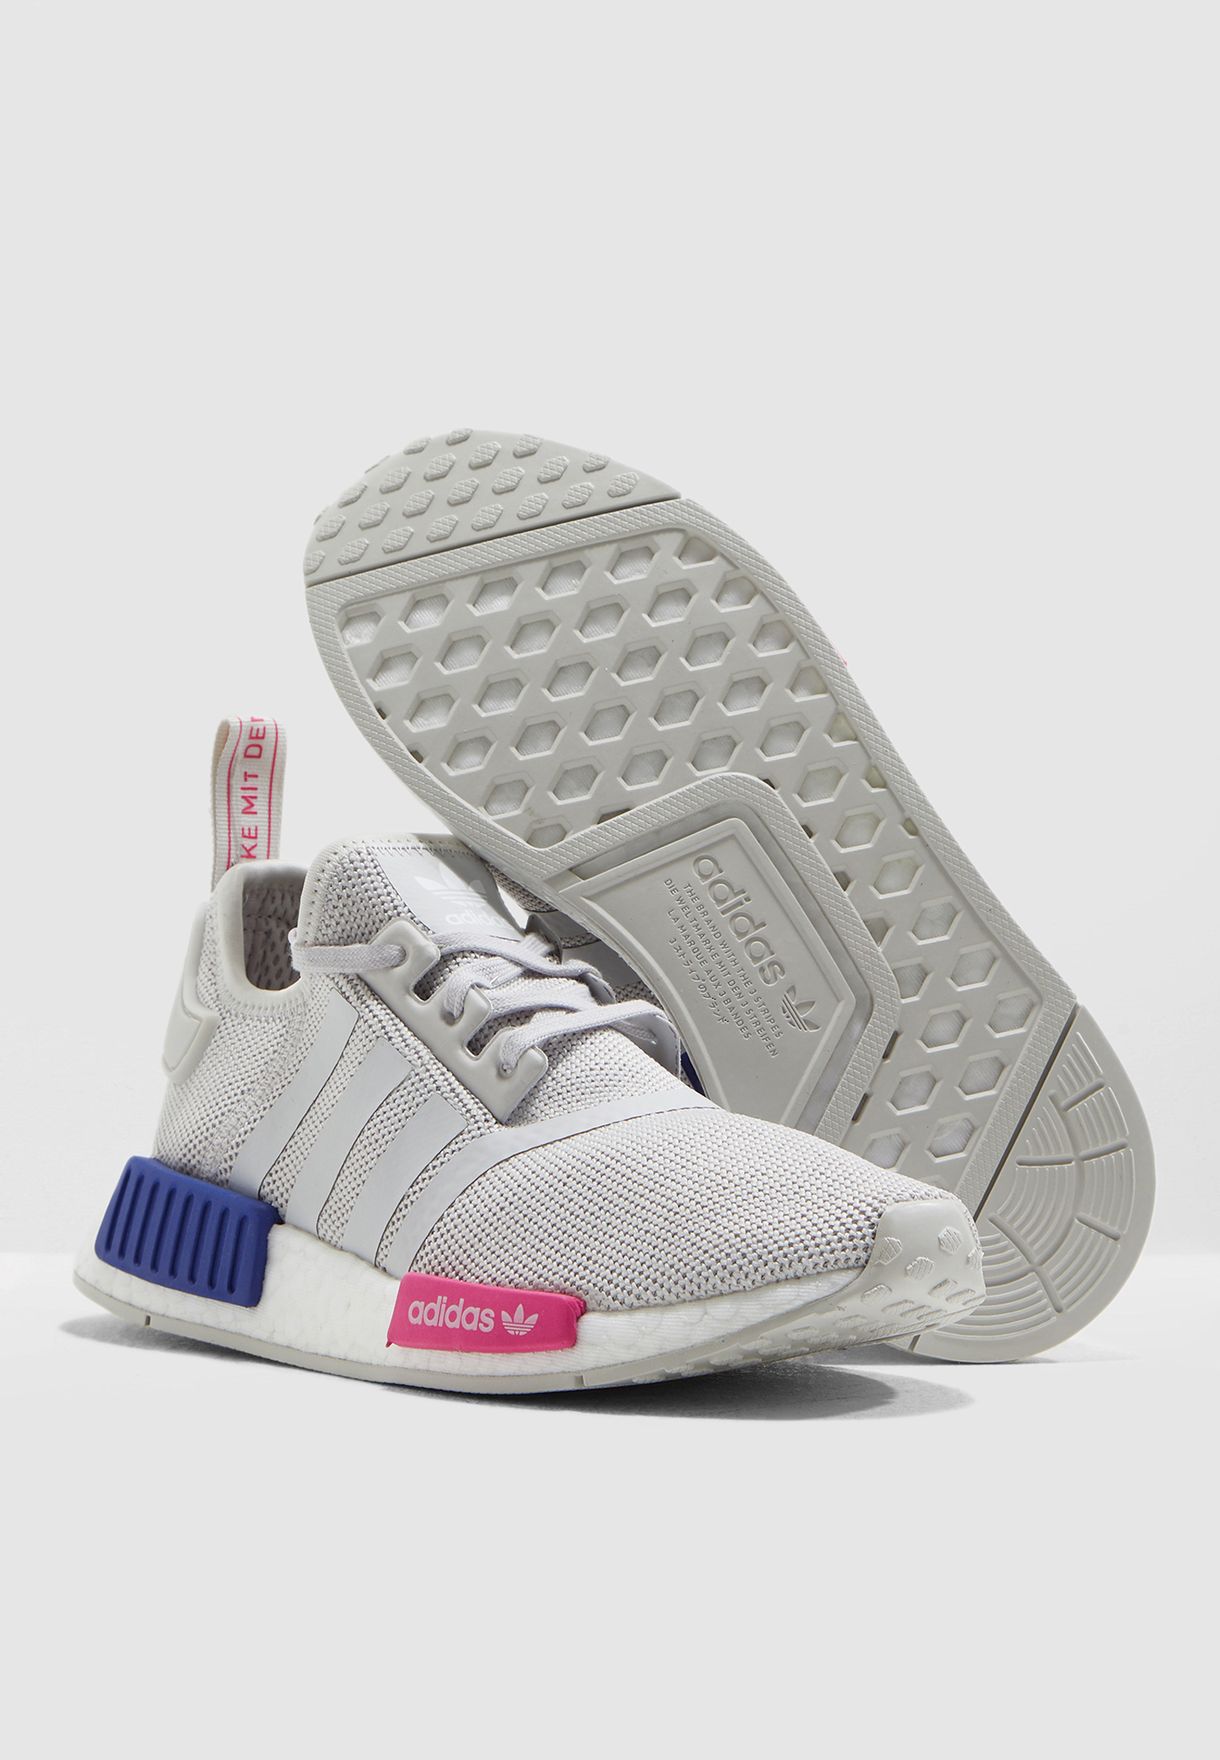 youth nmds